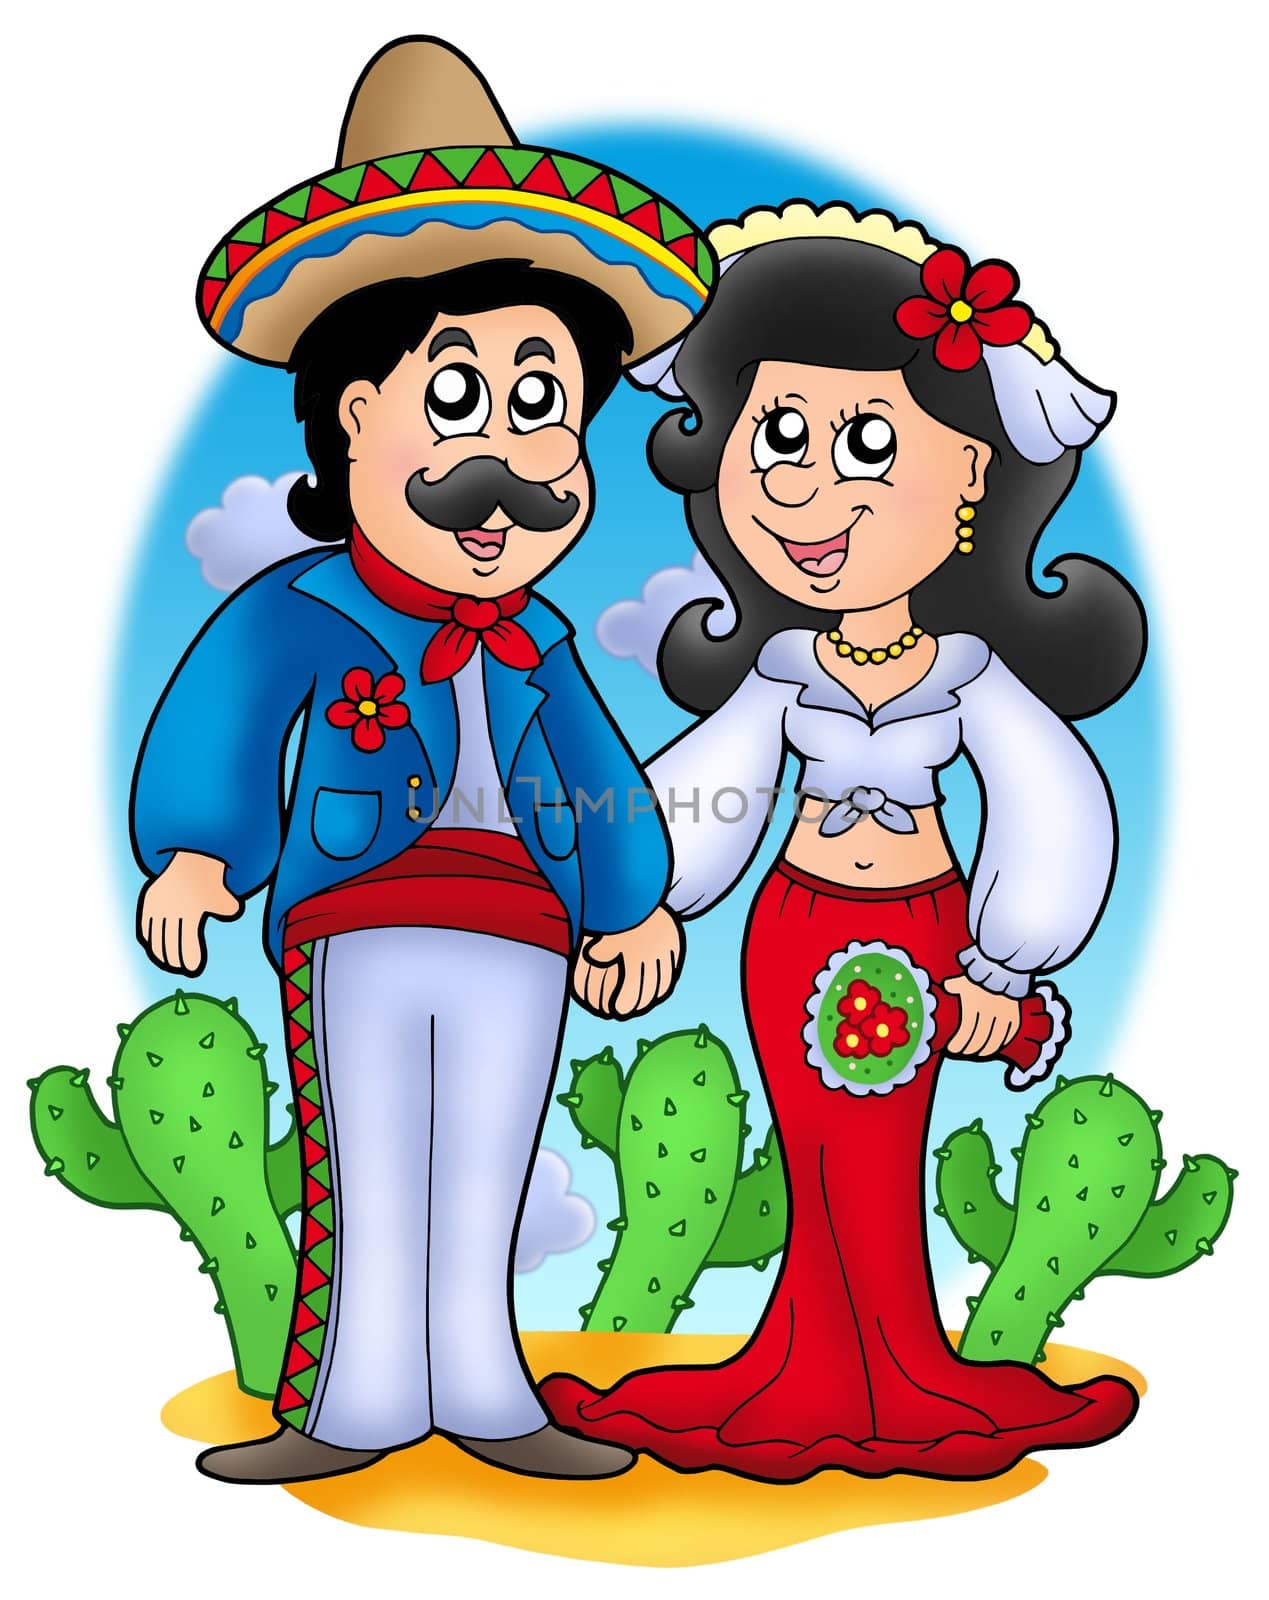 Mexican wedding couple - color illustration.